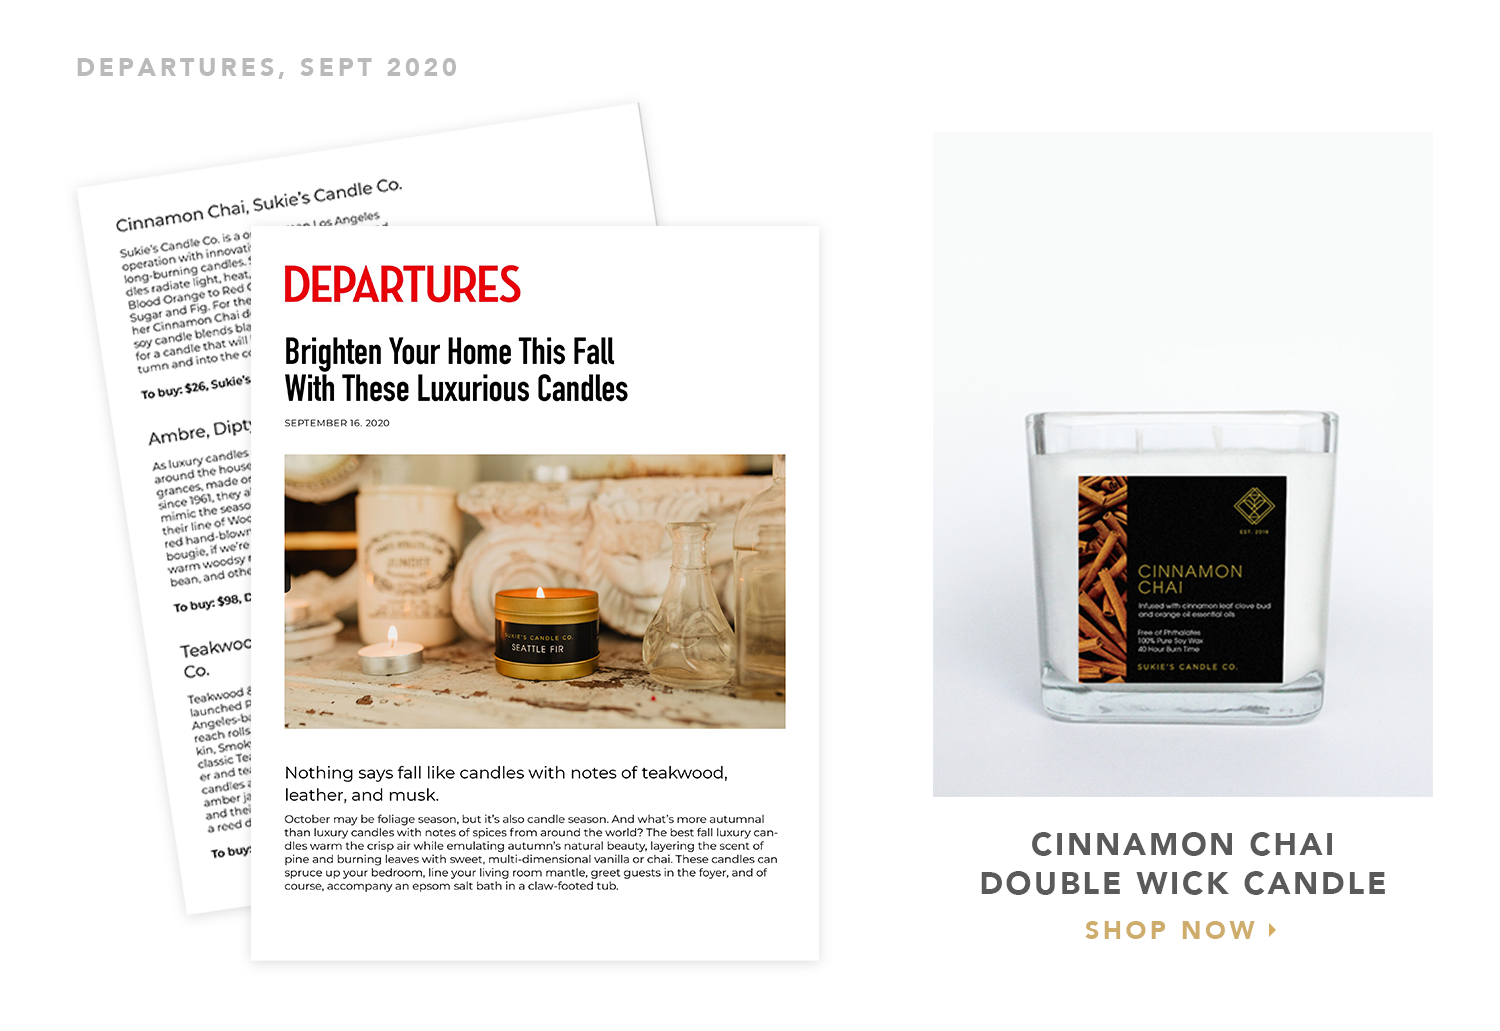 Departures Magazine Sukie's Candle Co. Feature September 2020